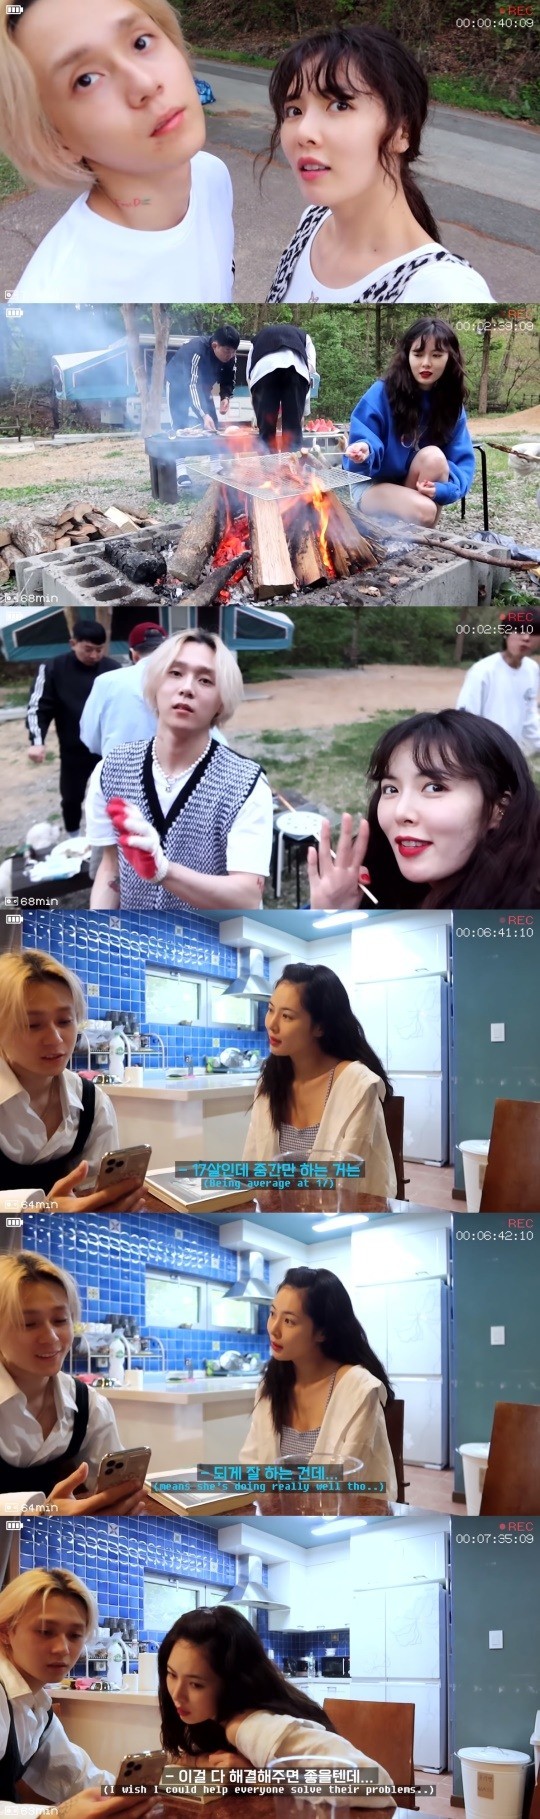 hyuna-reveals-cute-travel-diary-with-dawn-on-her-new-vlog-1